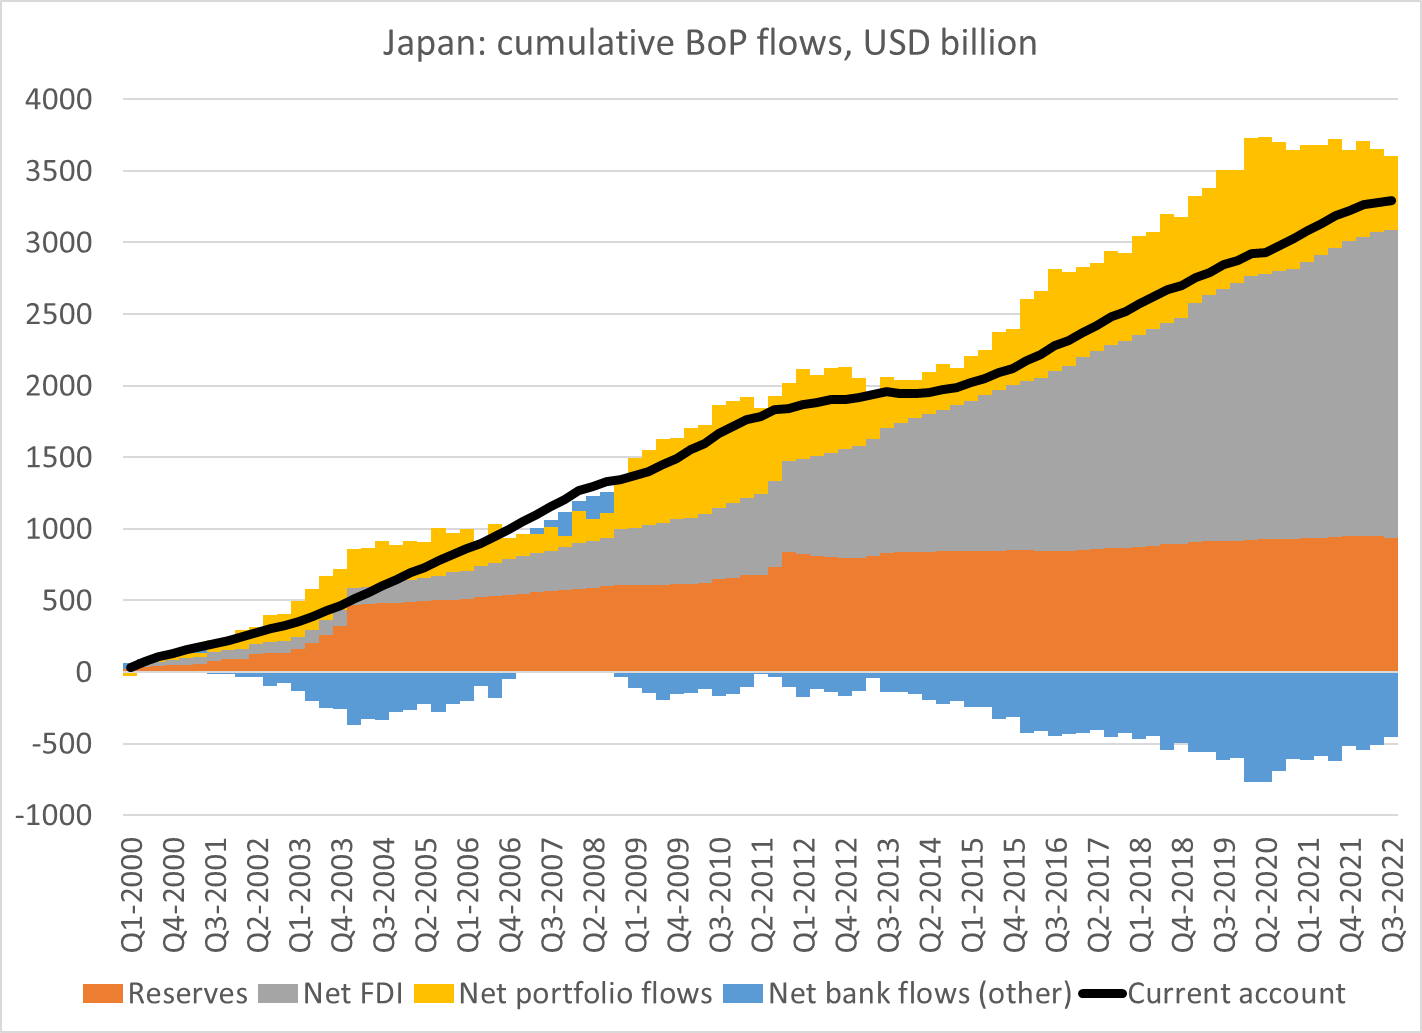 Chart: Japan cumulative Balance of Payment flows from 2000 to 2022.